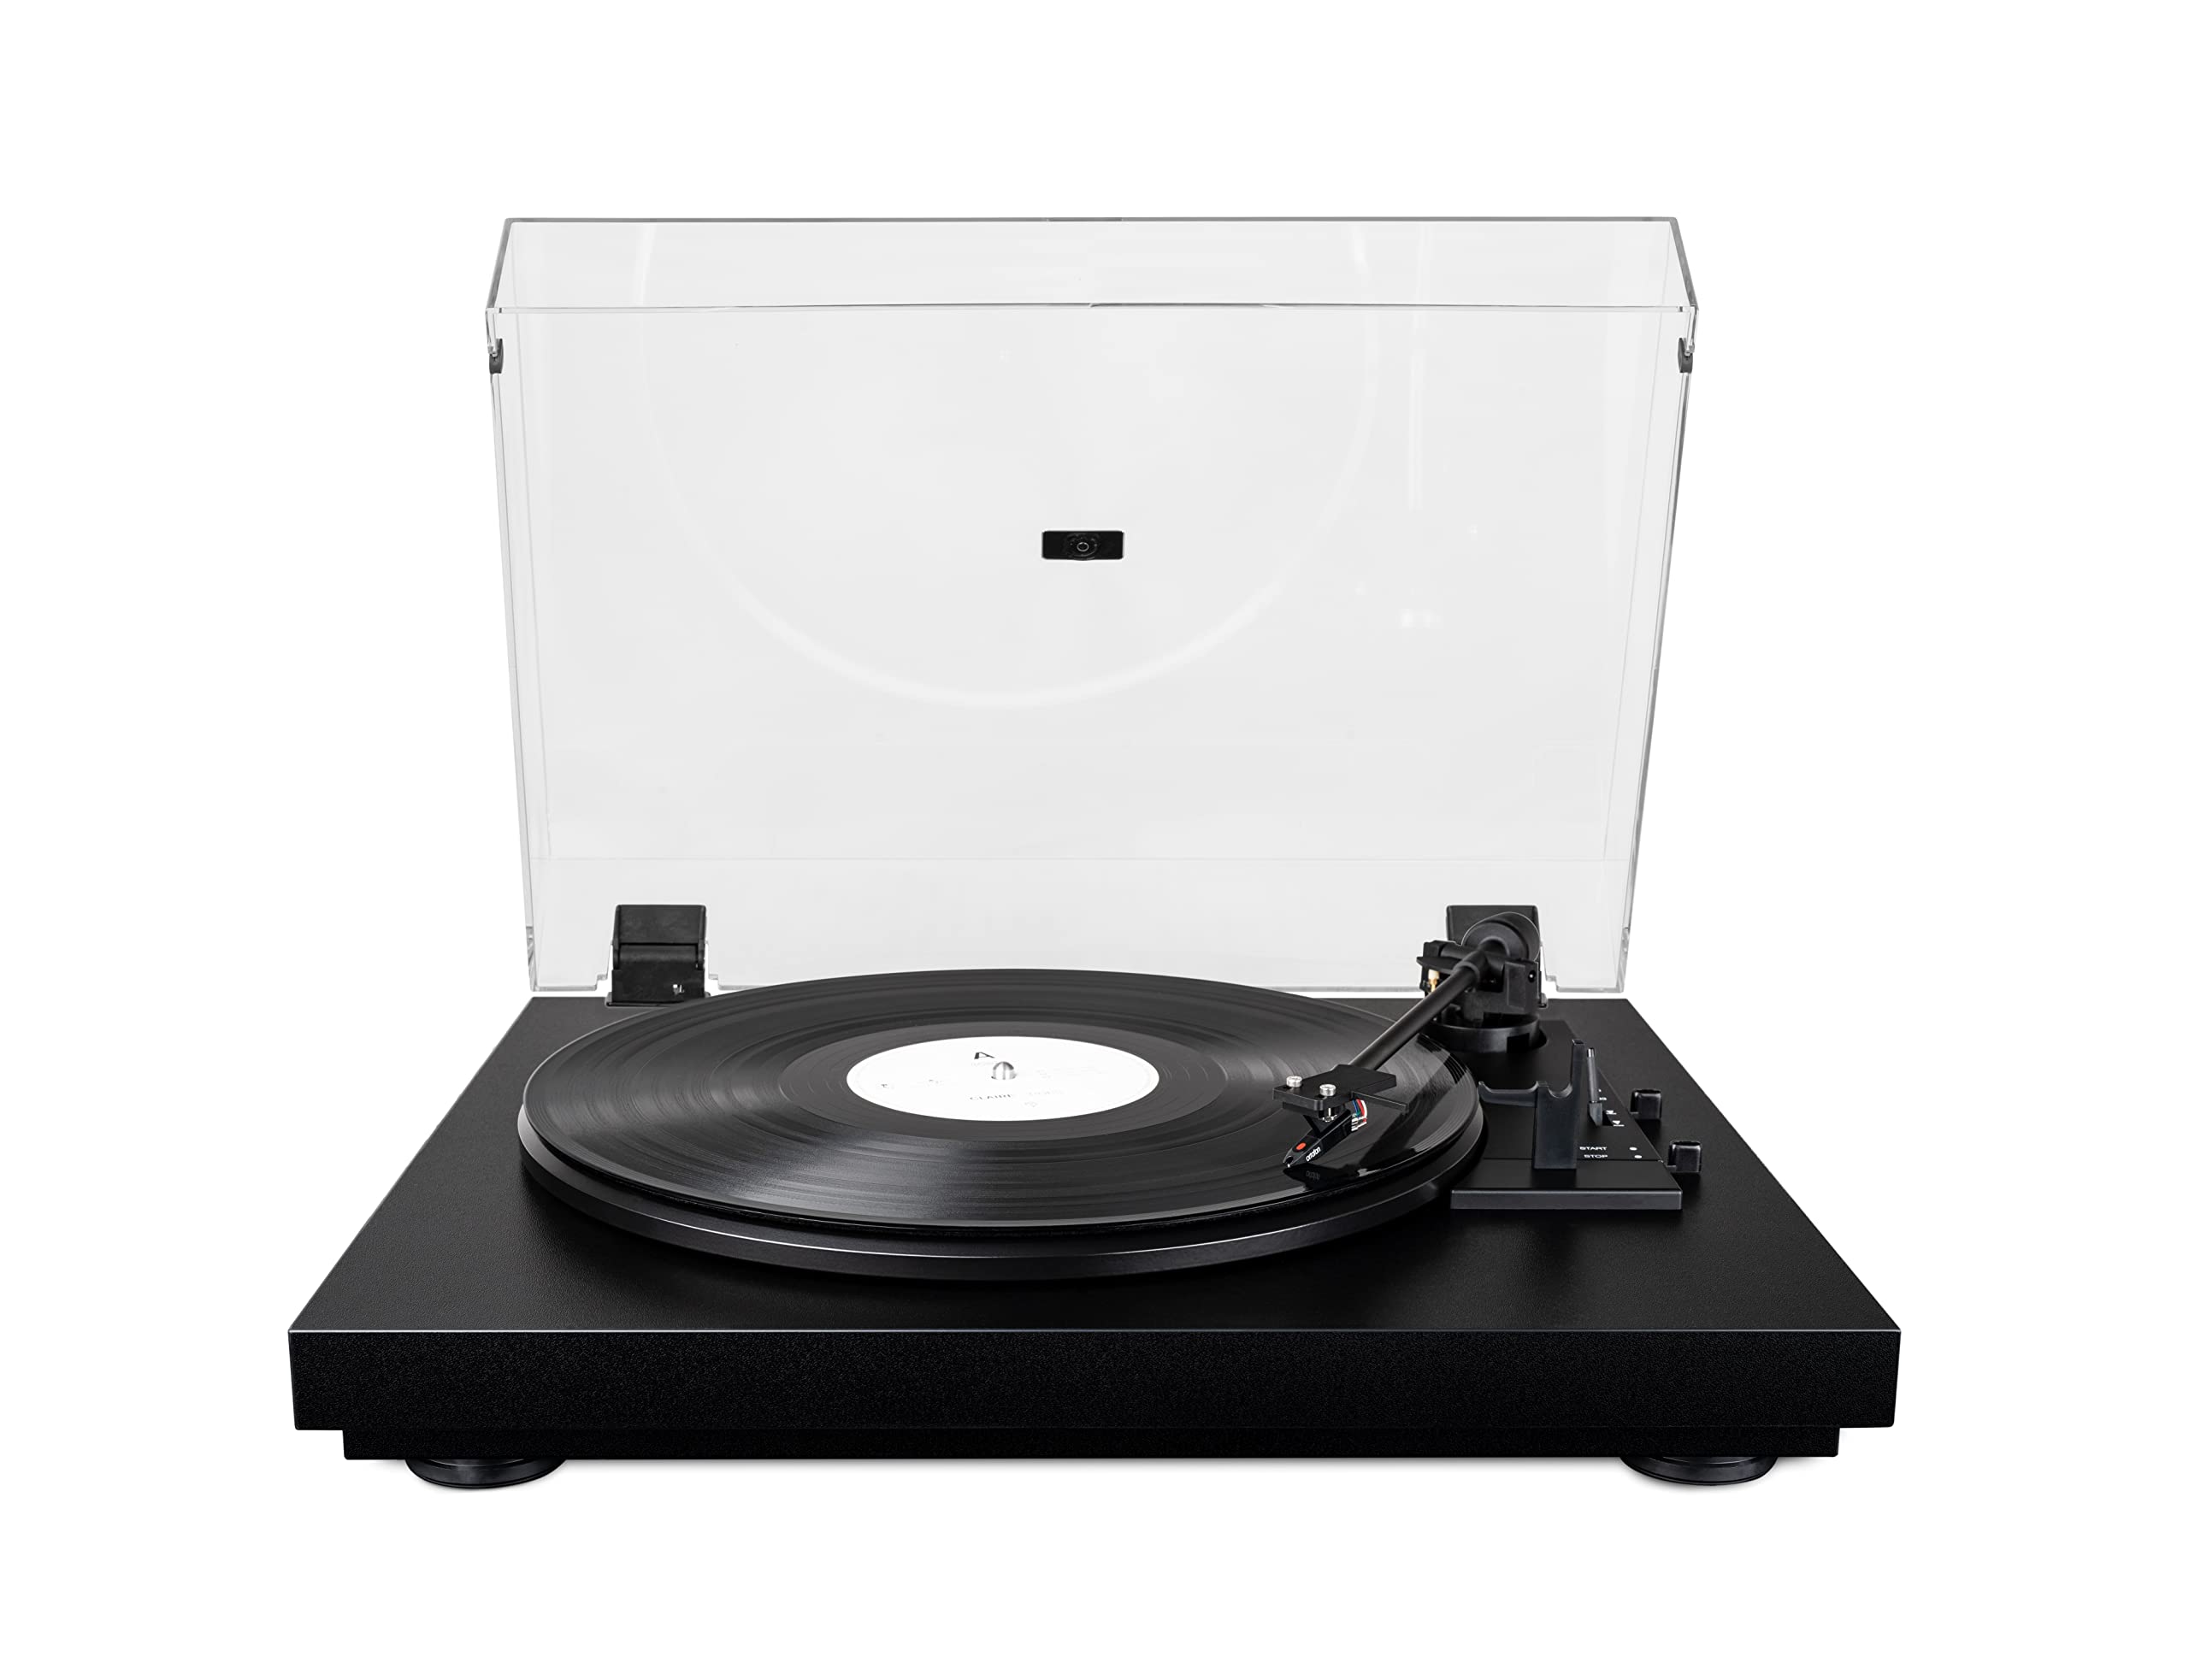  Pro-Ject Audio Systems Pro-Ject Automat A1 Record Player, Fully Automatic Turntable System with 8.3″ Aluminium Tonearm, Damped Metal Platter, Ortofon OM10 Cartridge, Belt Drive, 33/45 RPM, Vinyl...